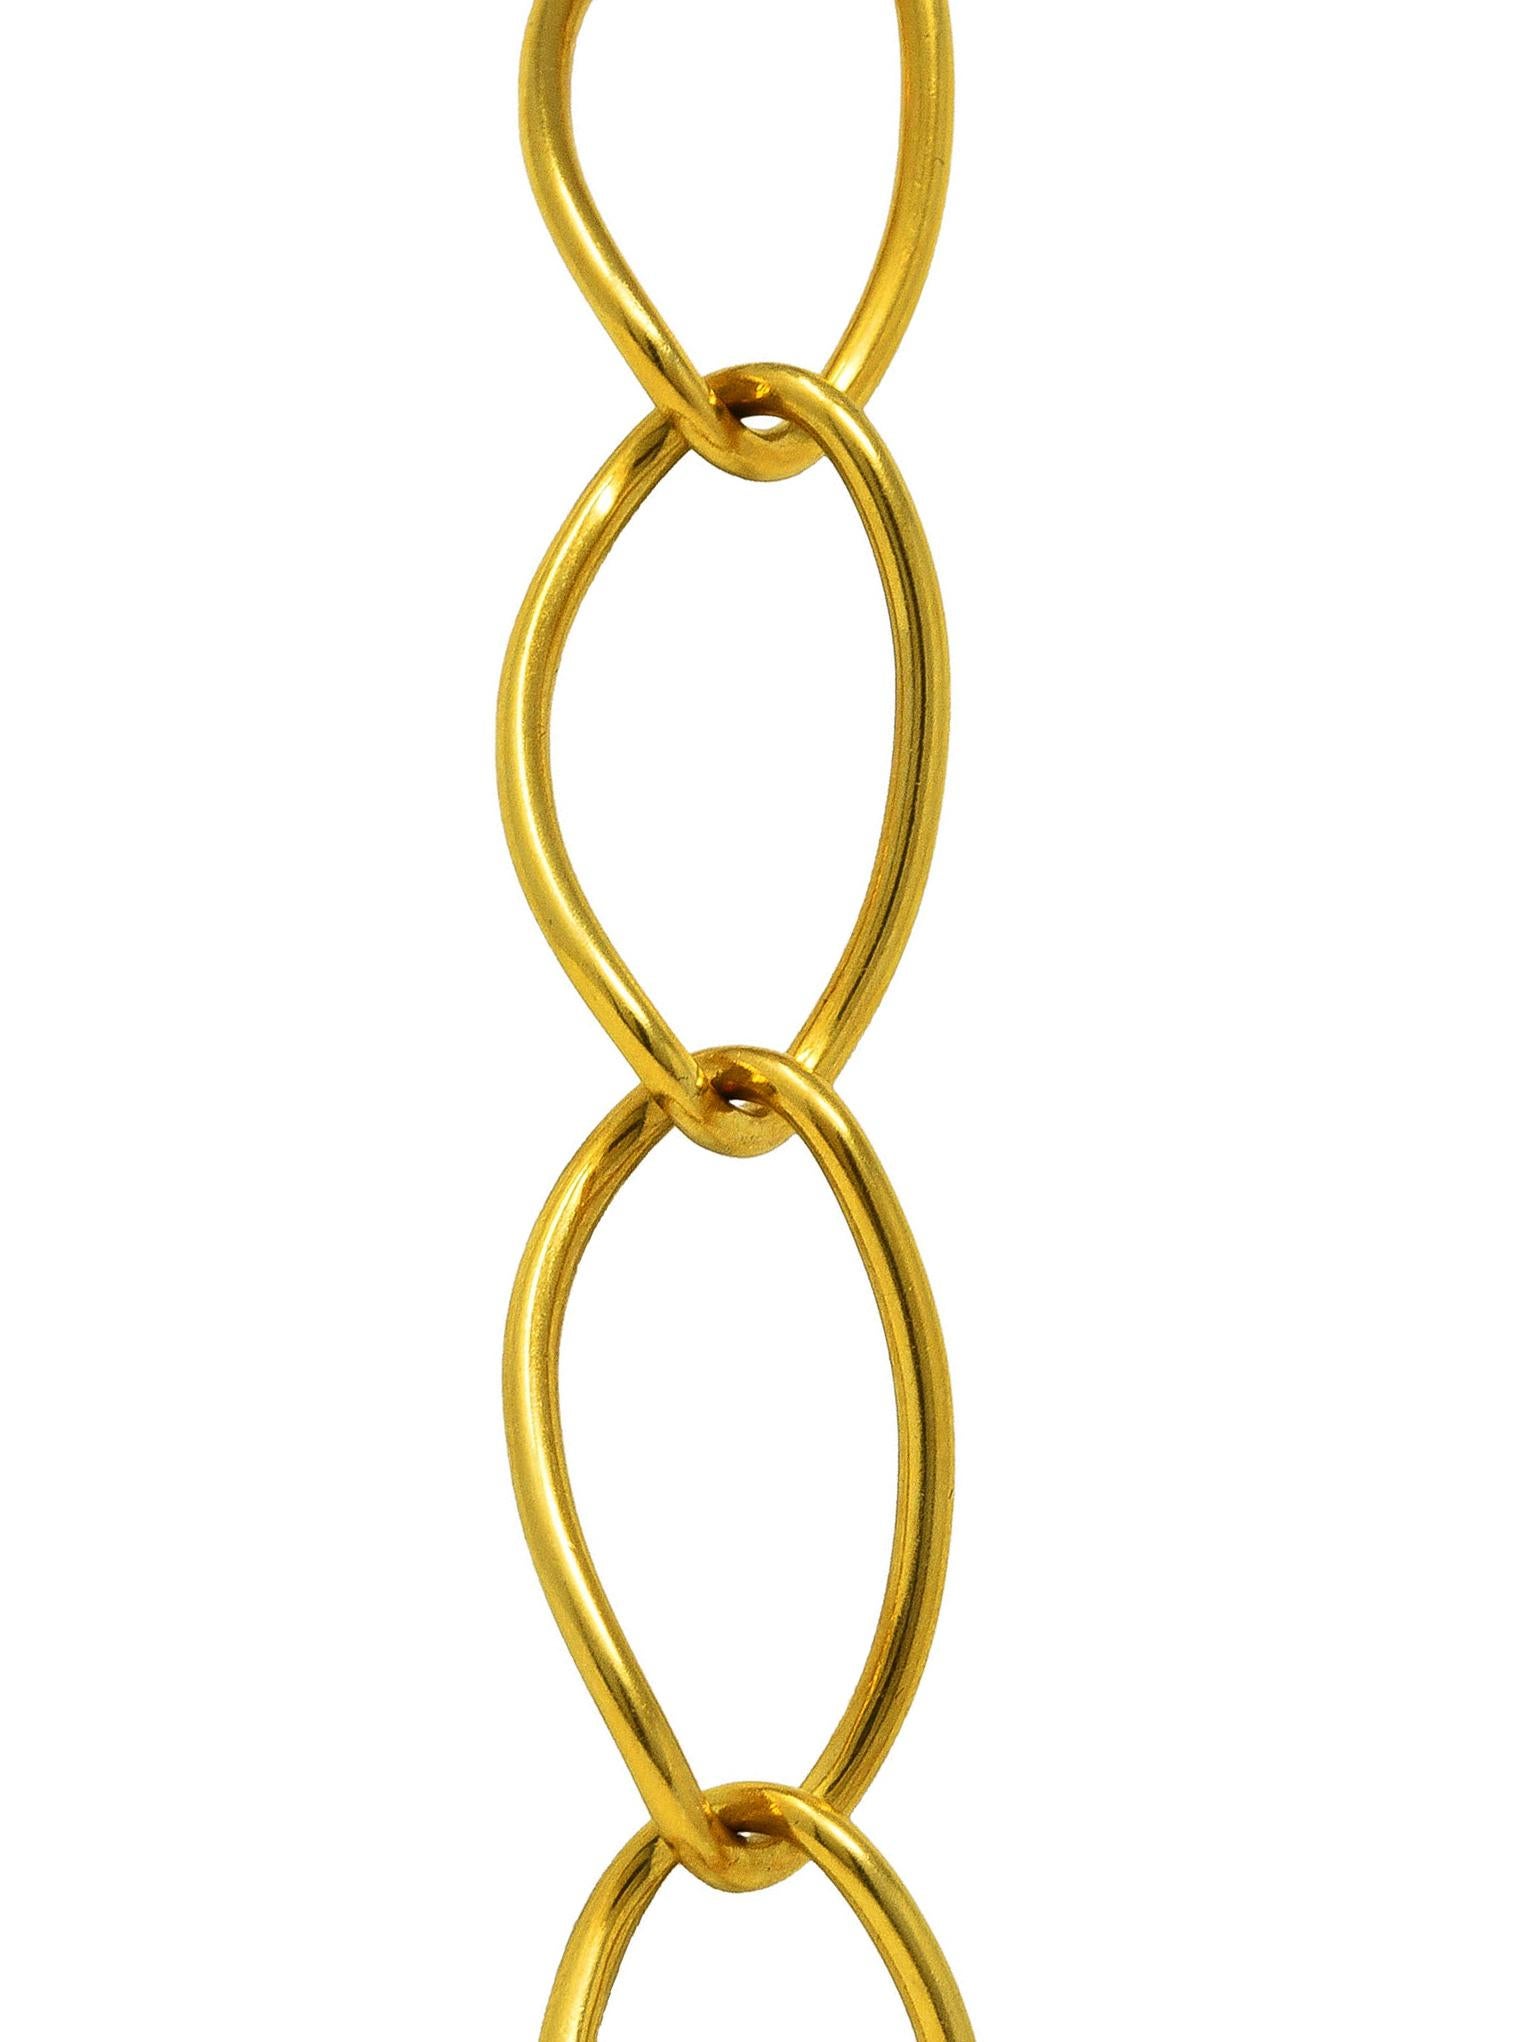 Women's or Men's Pomellato Contemporary 18 Karat Yellow Gold Twisted Link Chain Necklace